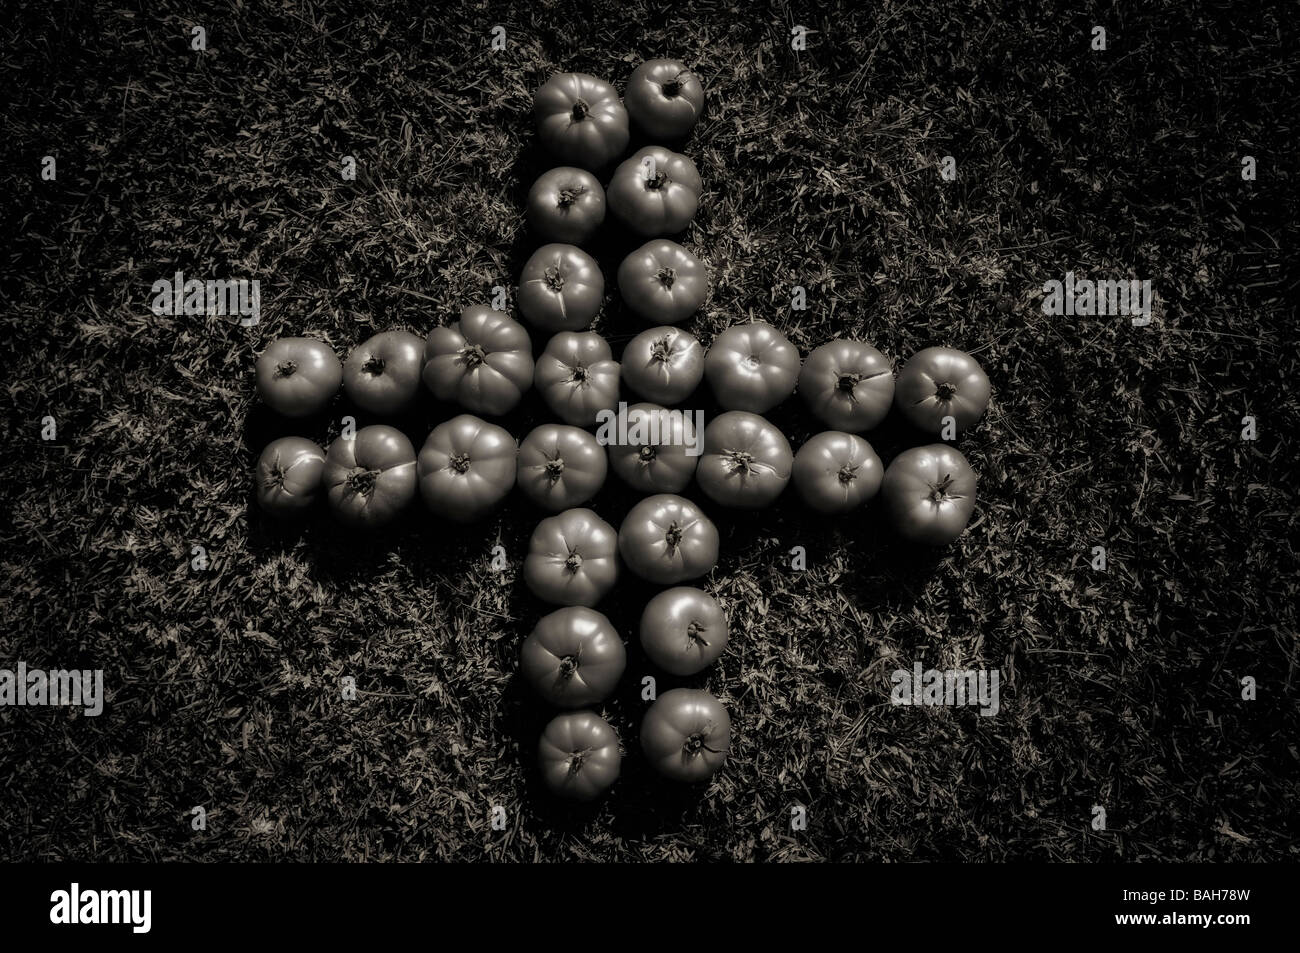 Group of tomatoes representing a cross over the grass in black and white Stock Photo